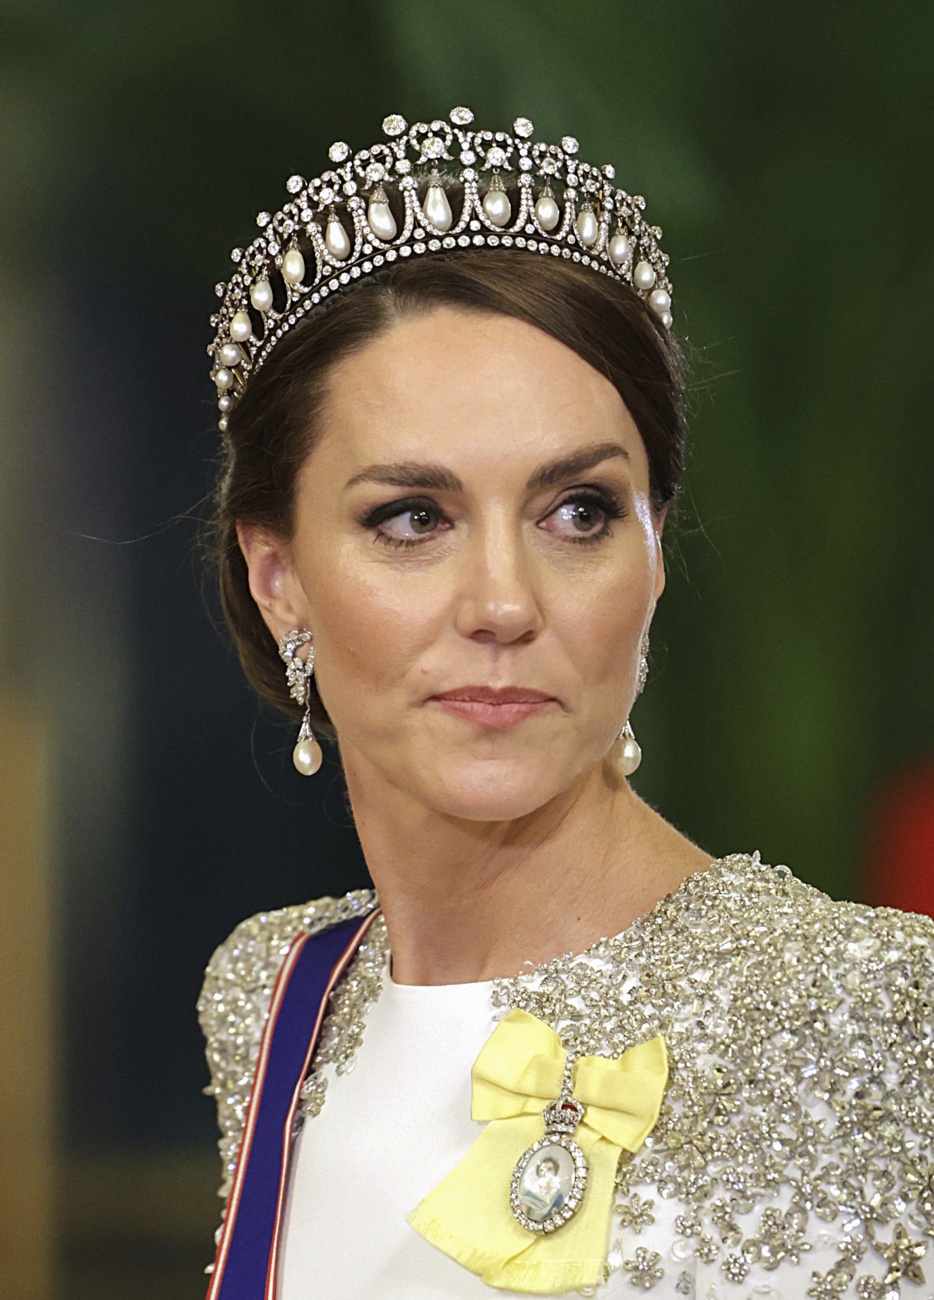 Kate Middleton pays homage to Lady Di at her first gala dinner